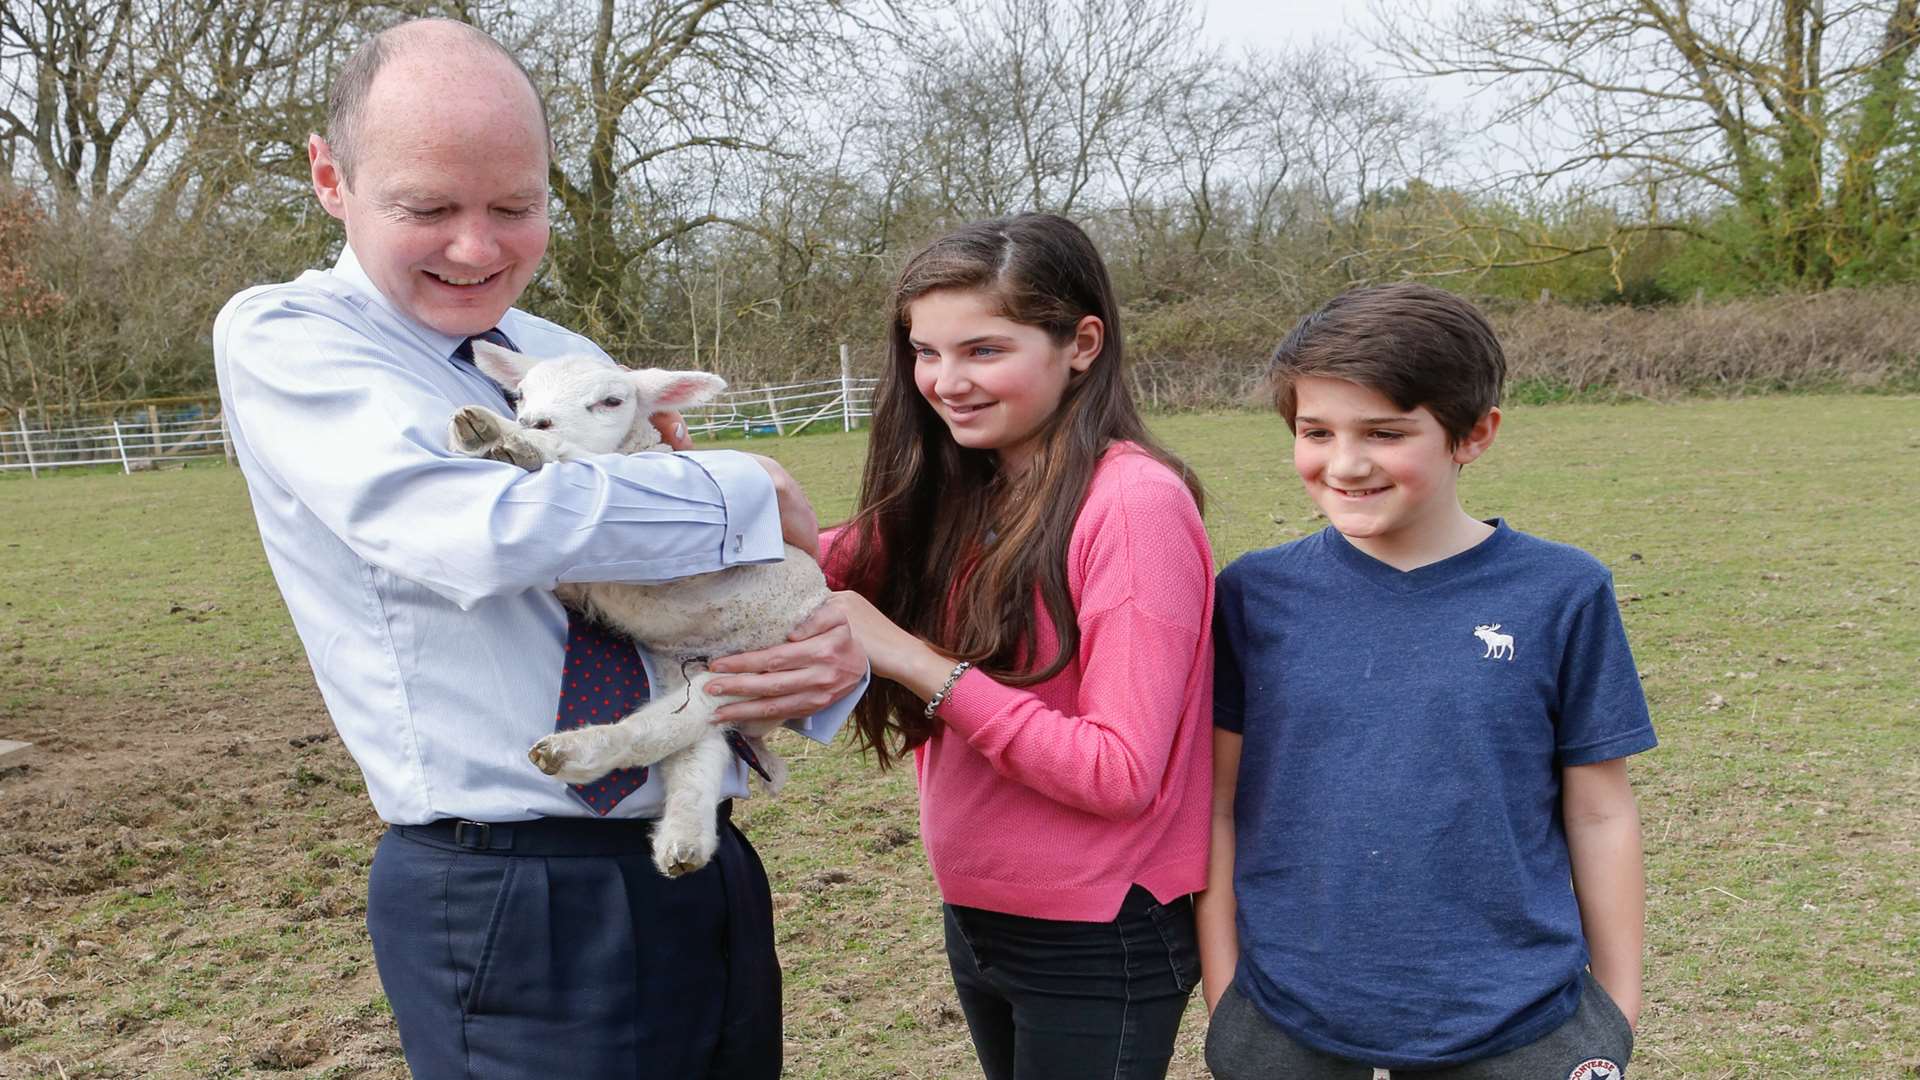 Lib Dem candidate Jasper Gerard shows his children Emilia and Fred how to hold a sheep